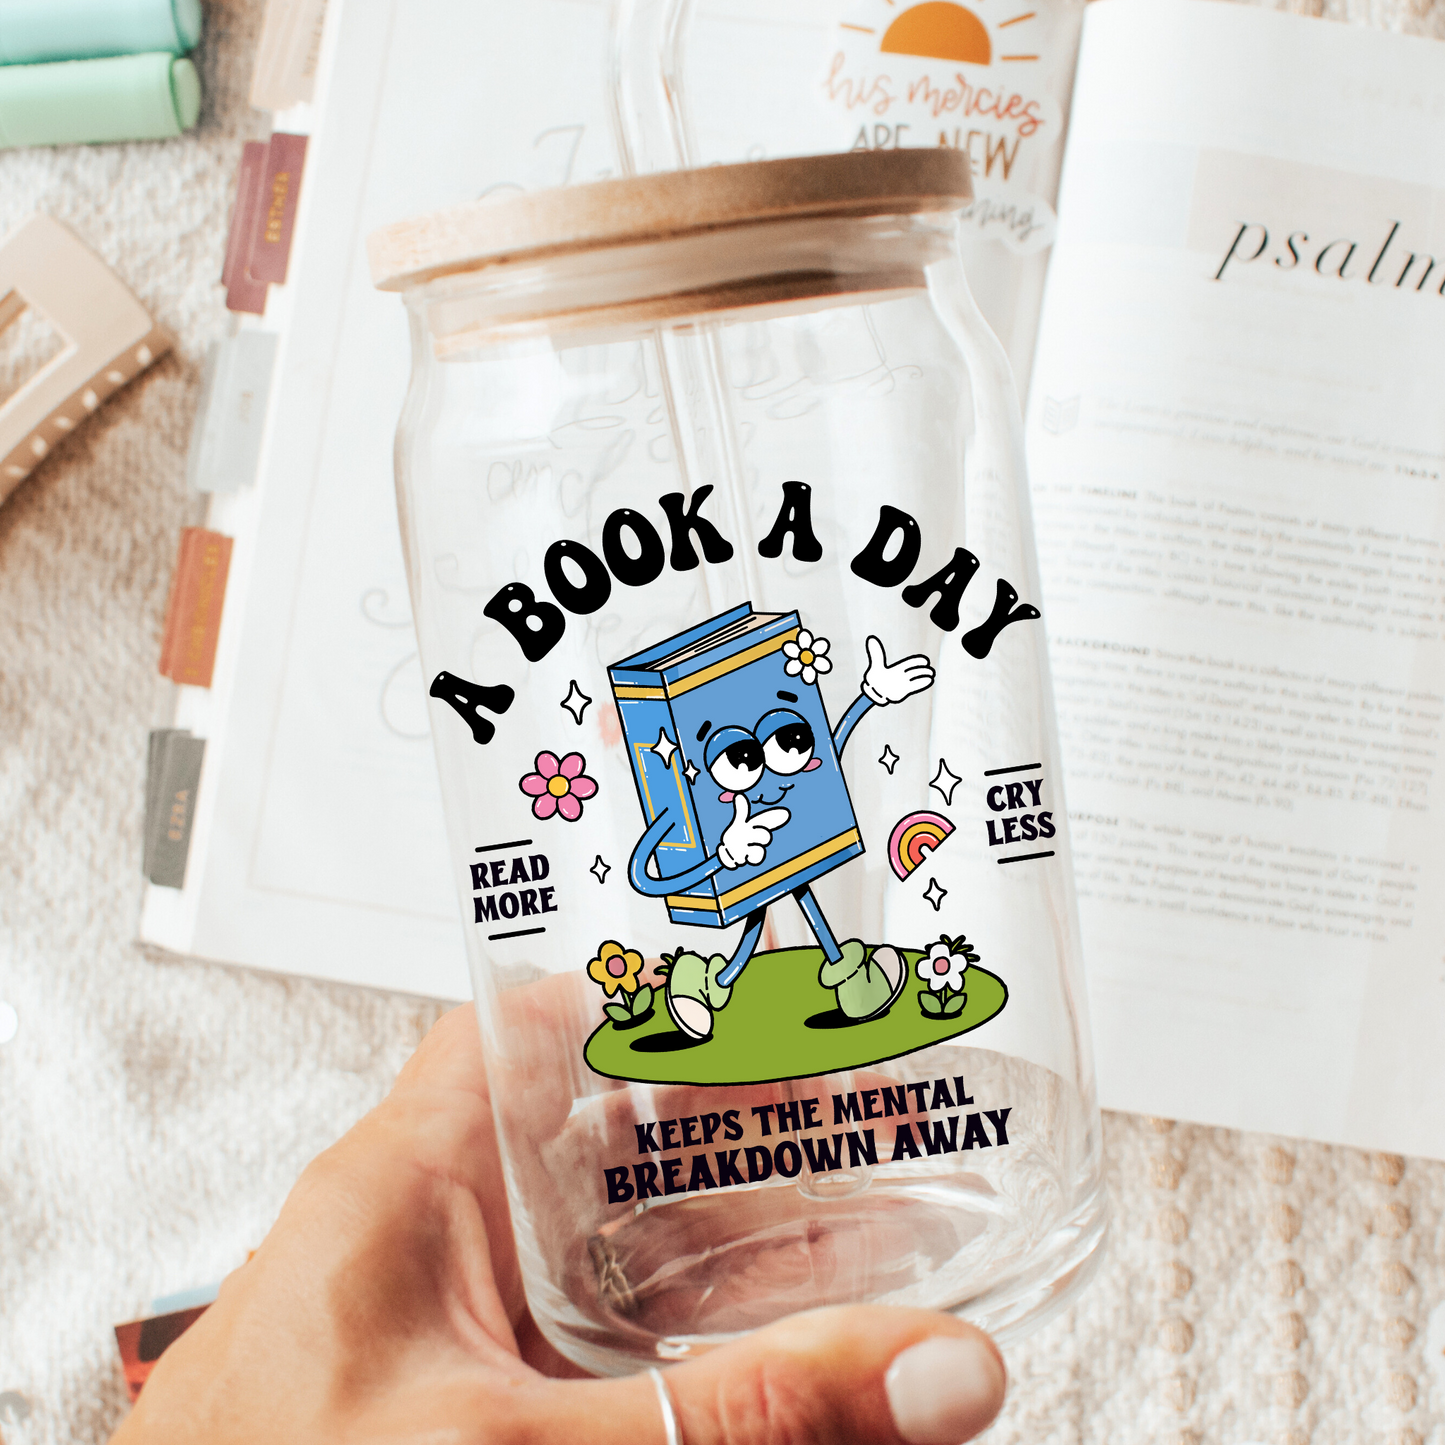 A Book A Day Tee + FREE CUP